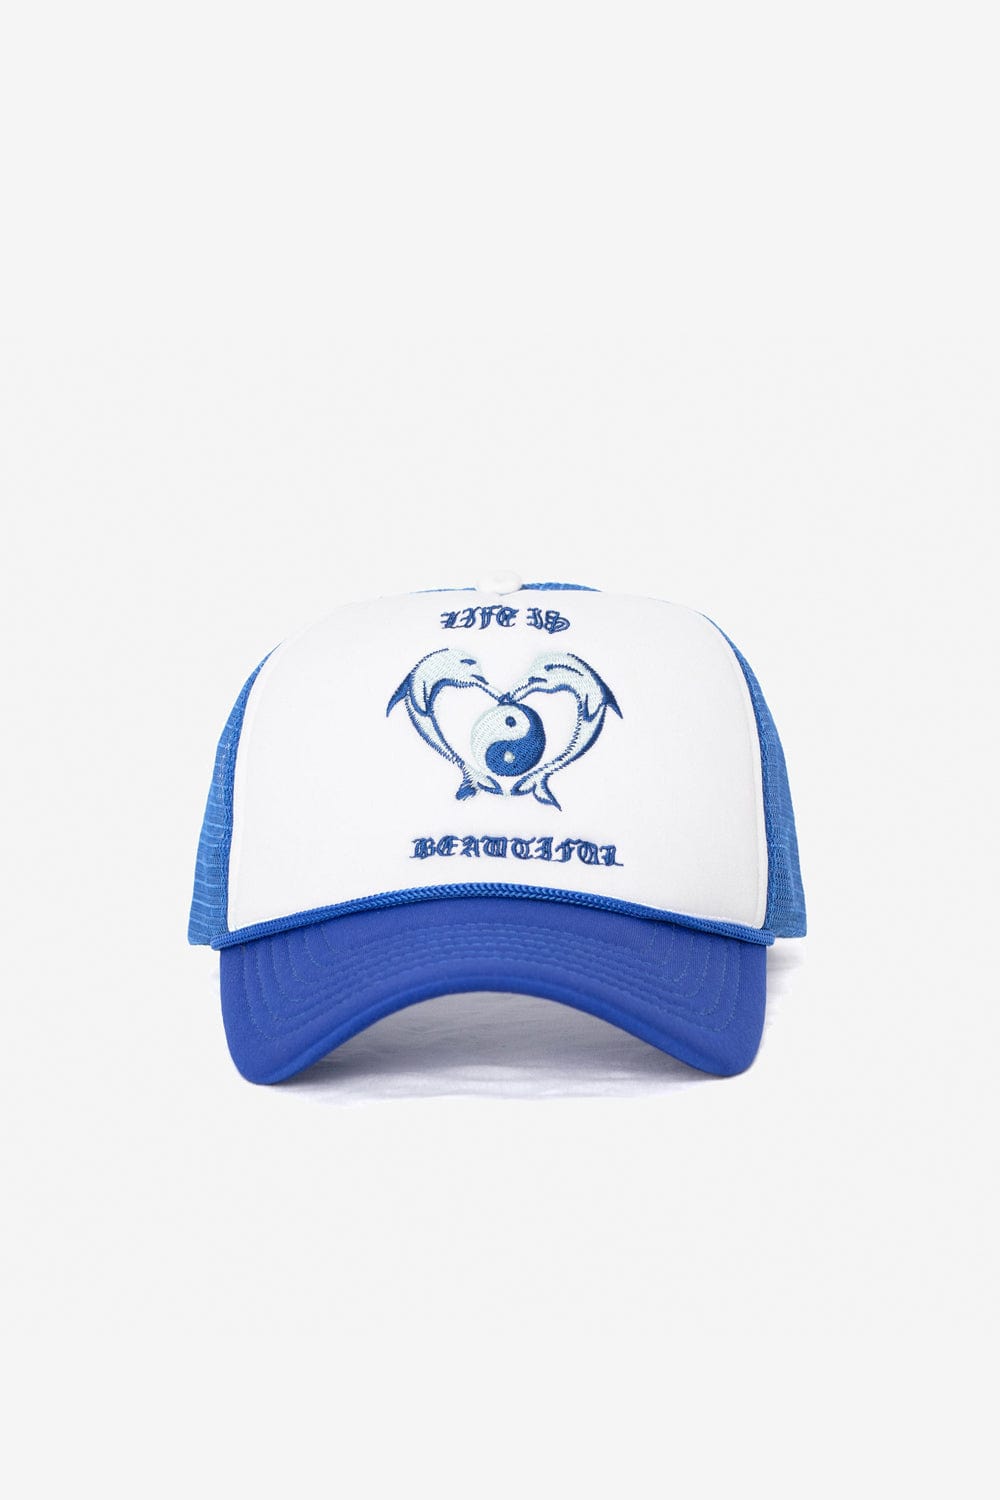 Jungles Life is Beautiful Cap (Blue/White) - Commonwealth